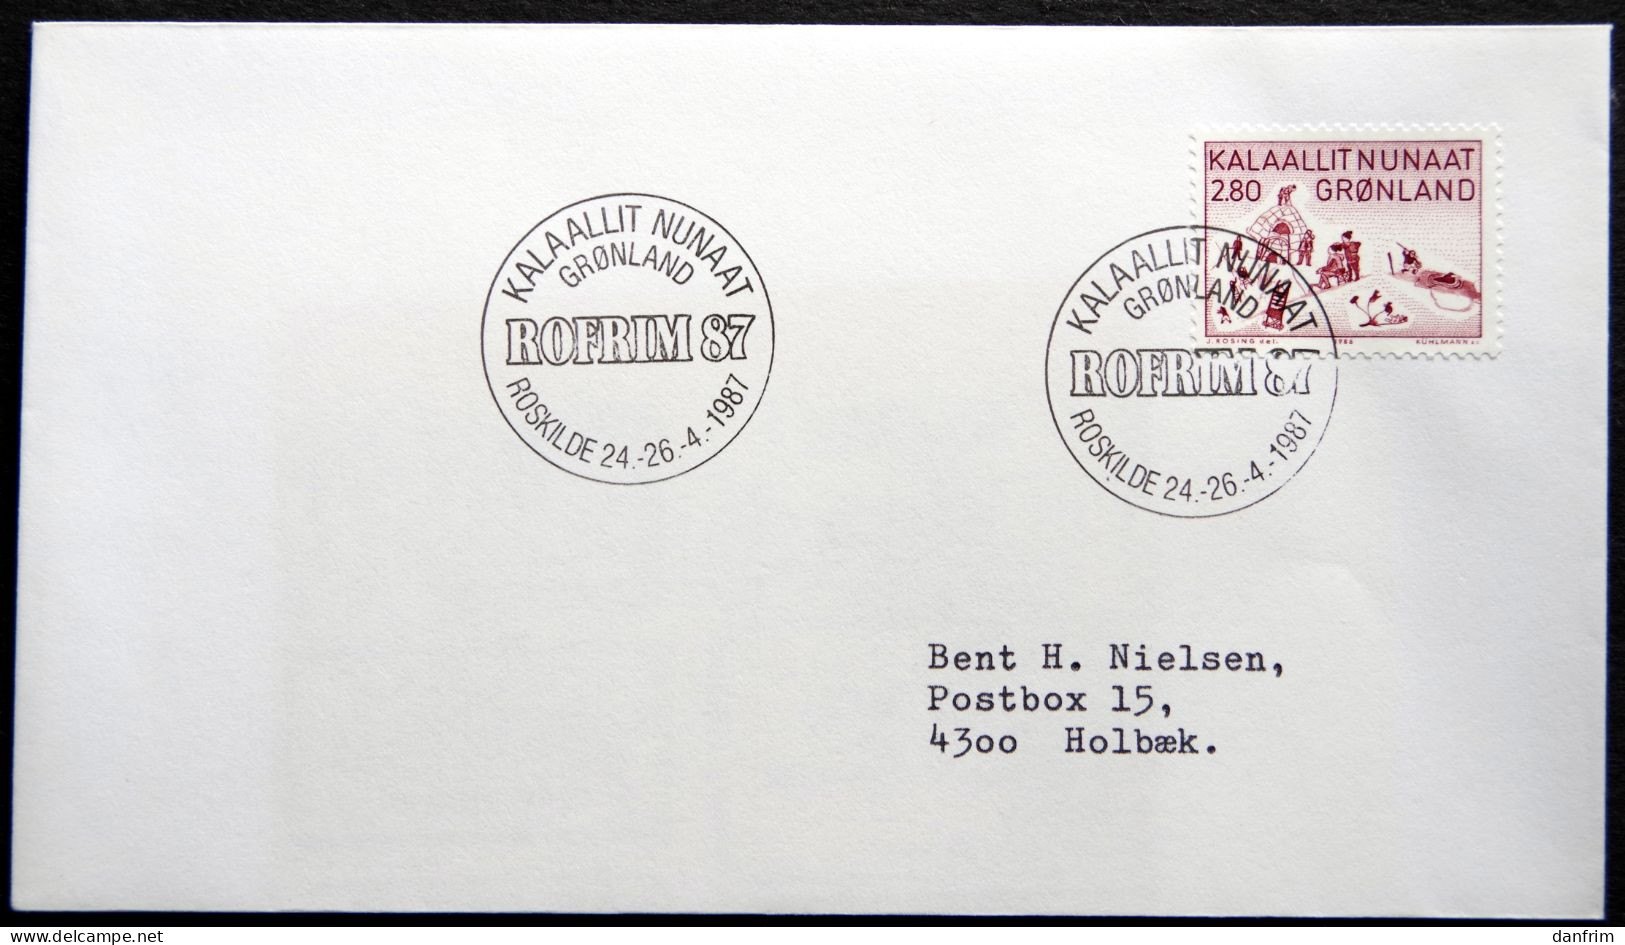 Greenland 1987 SPECIAL POSTMARKS.ROFRIM 87 ROSKILDE 24-26-4-1987 ( Lot 877 - Covers & Documents